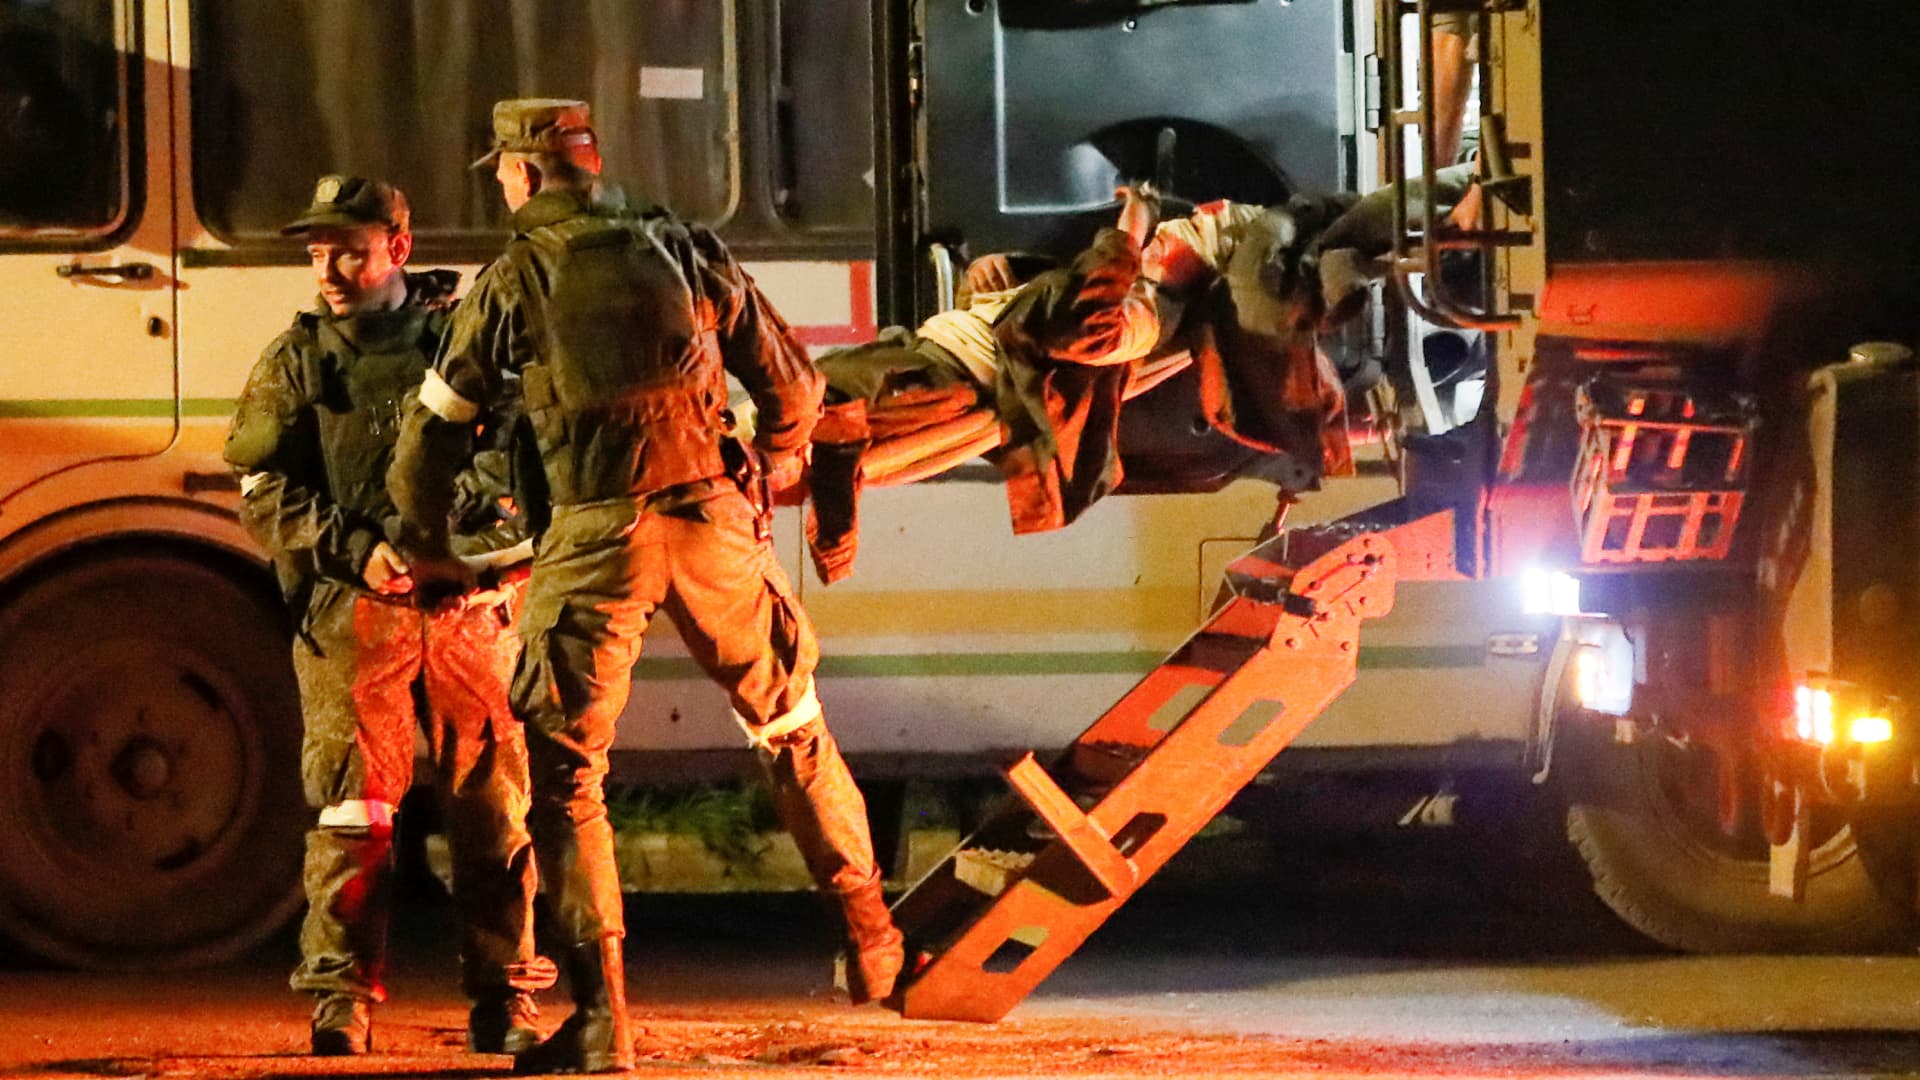 A wounded service member of Ukrainian forces from the besieged Azovstal steel mill in Mariupol is transported on a stretcher out of a bus, which arrived under escort of the pro-Russian military in the course of Ukraine-Russia conflict in Novoazovsk, Ukraine May 16, 2022. 